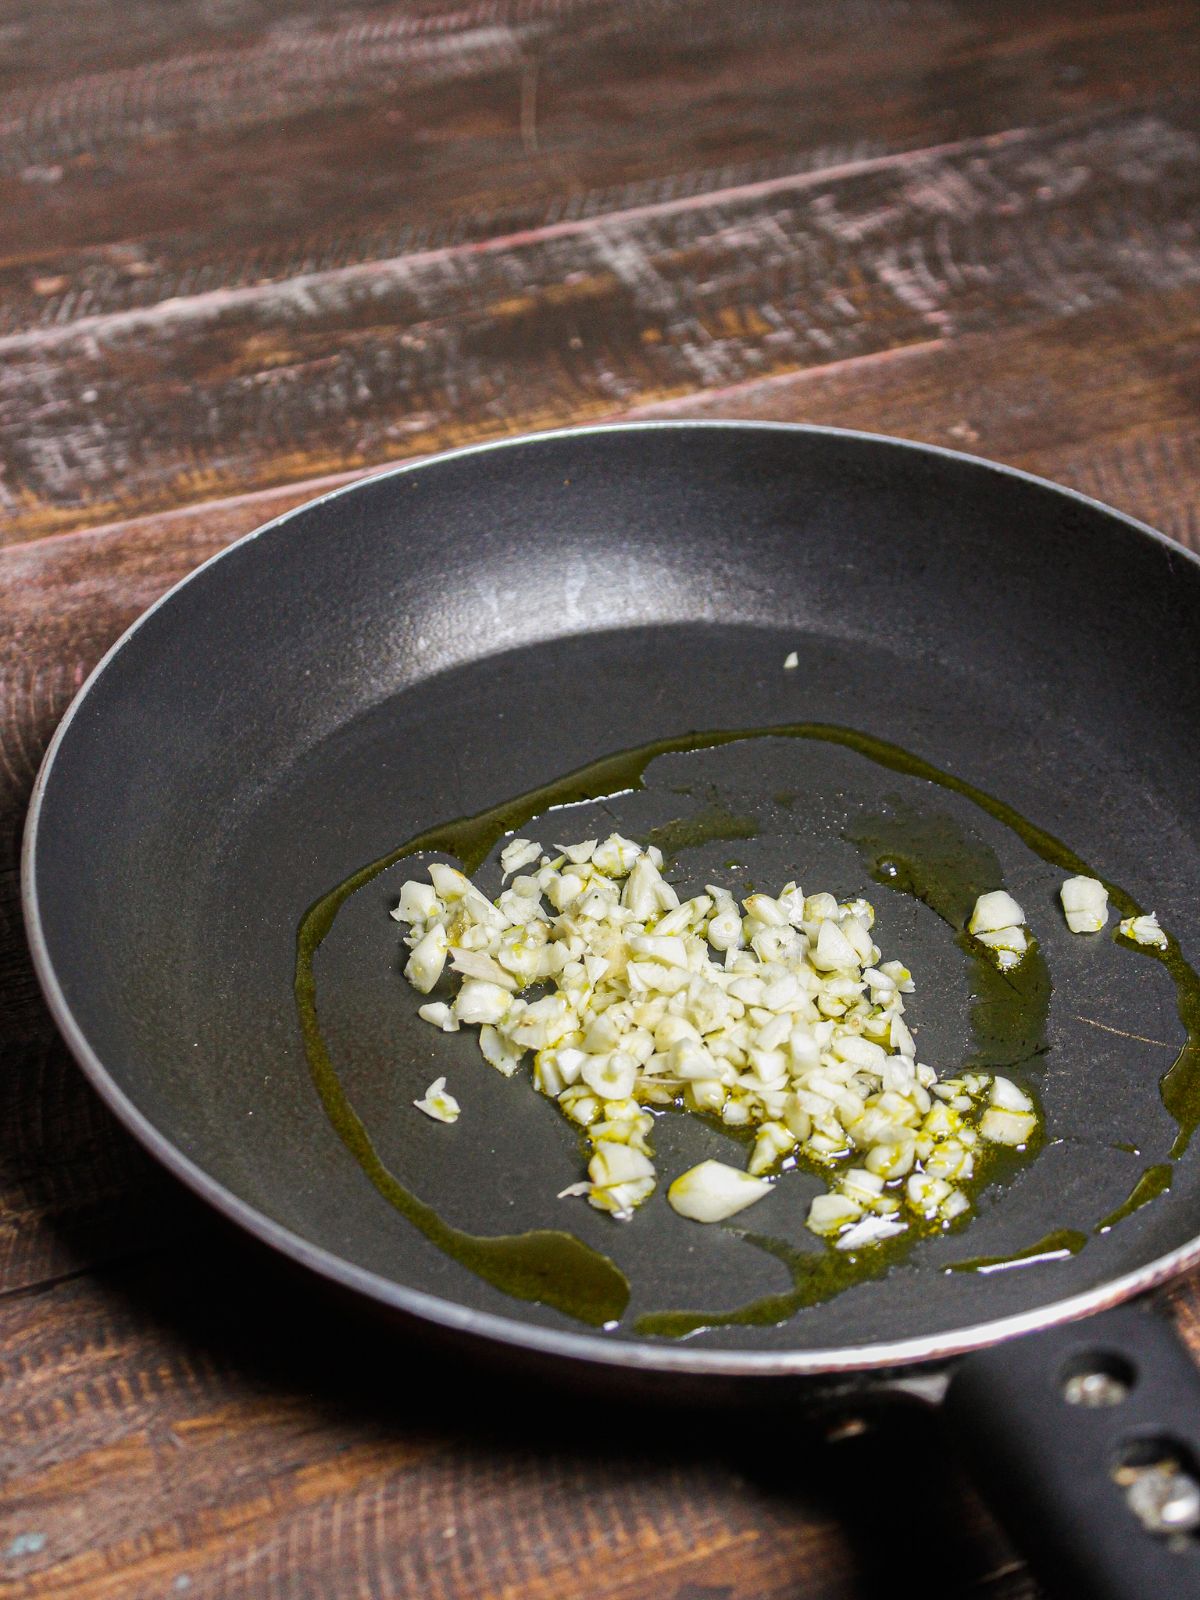 Take oil and chopped garlic in a pan 